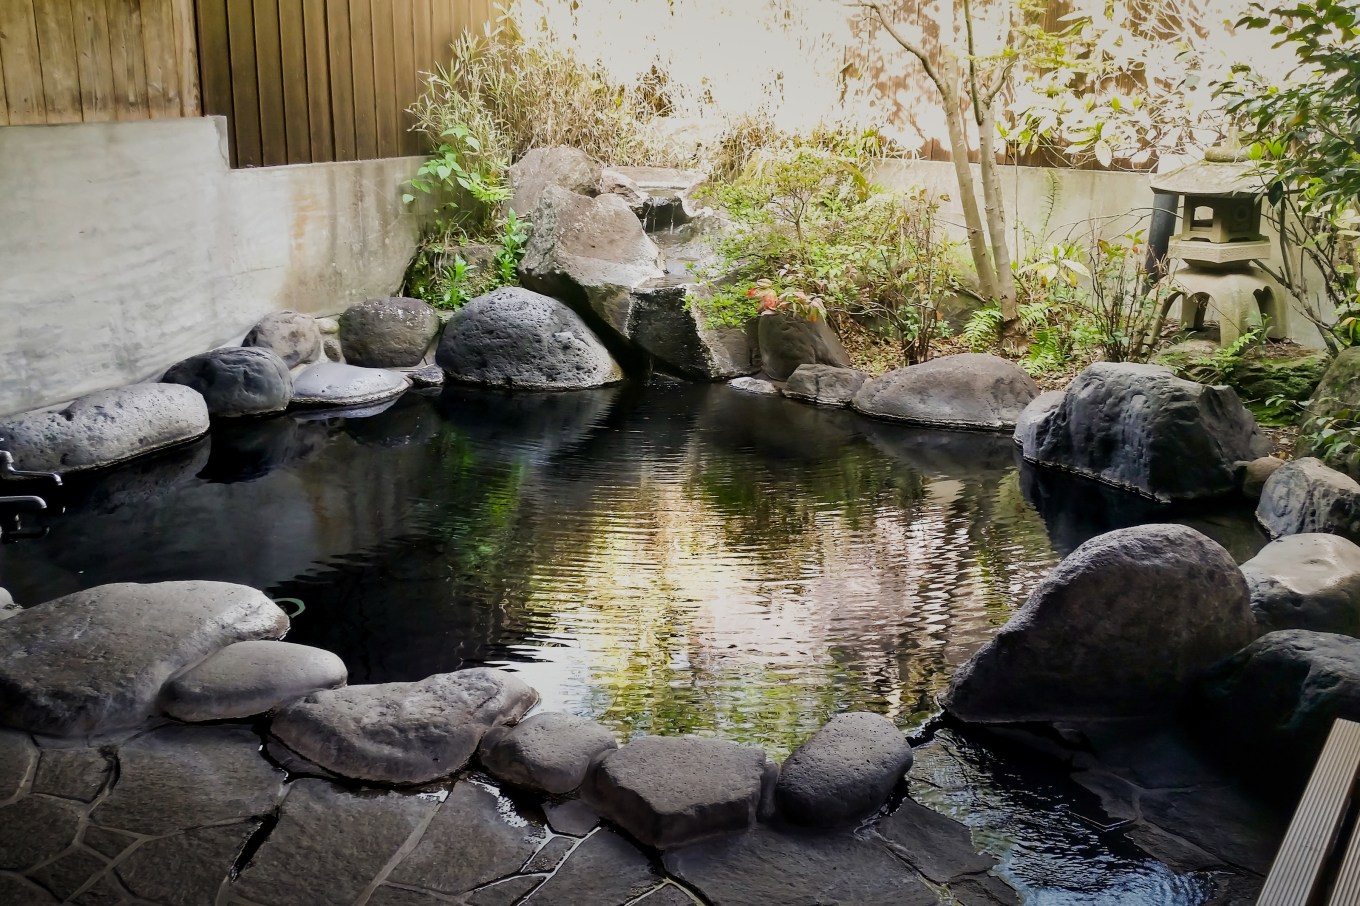 A natural plunge pool surrounded by stones in a circular shape.